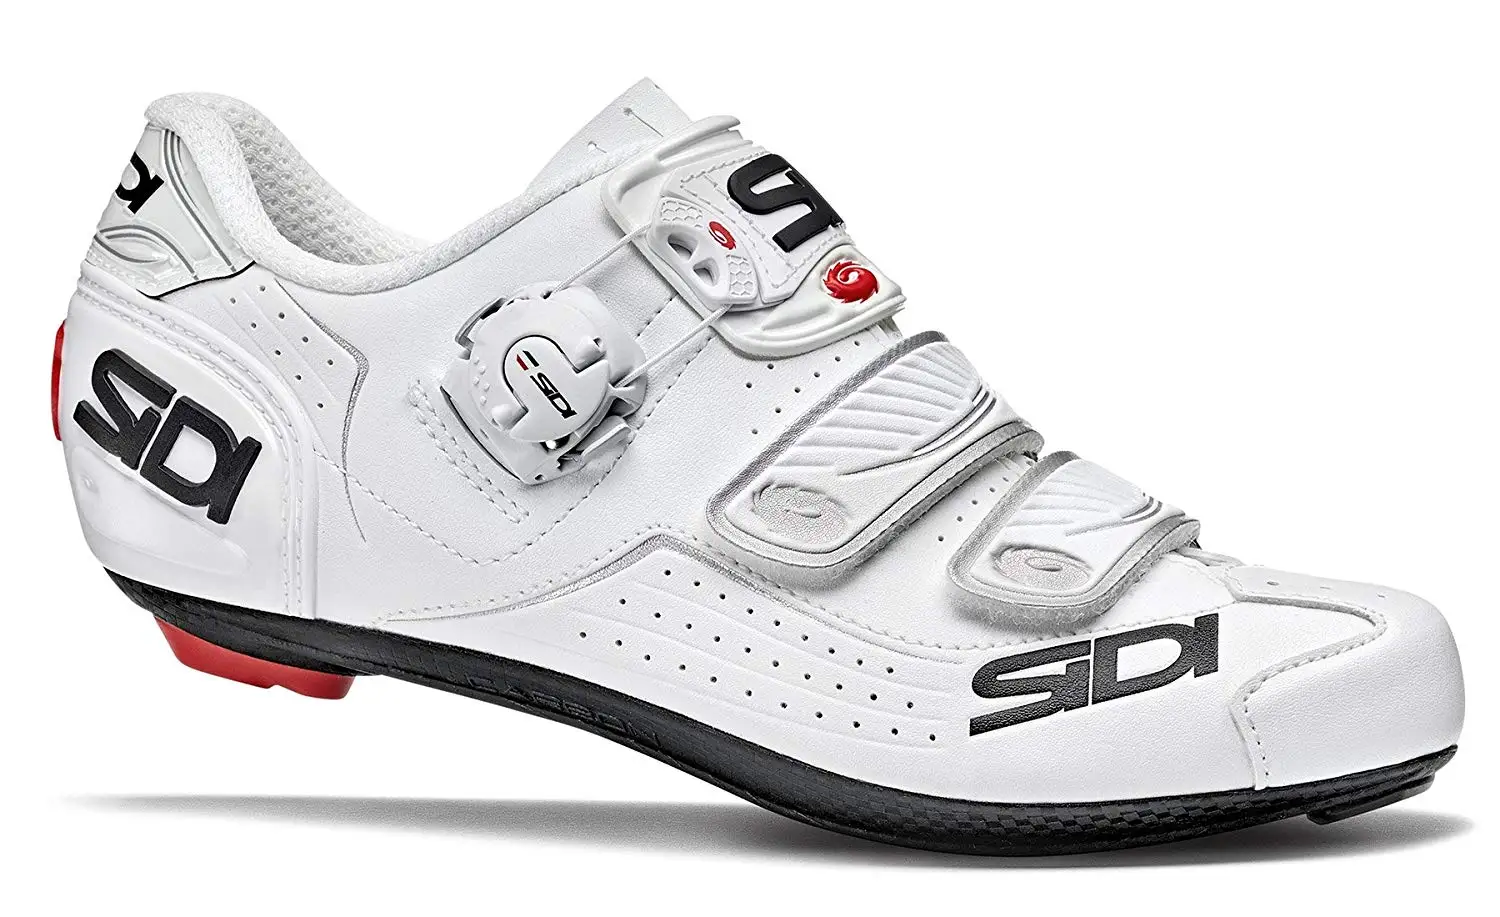 Cheap Road Shoes Sidi, find Road Shoes 